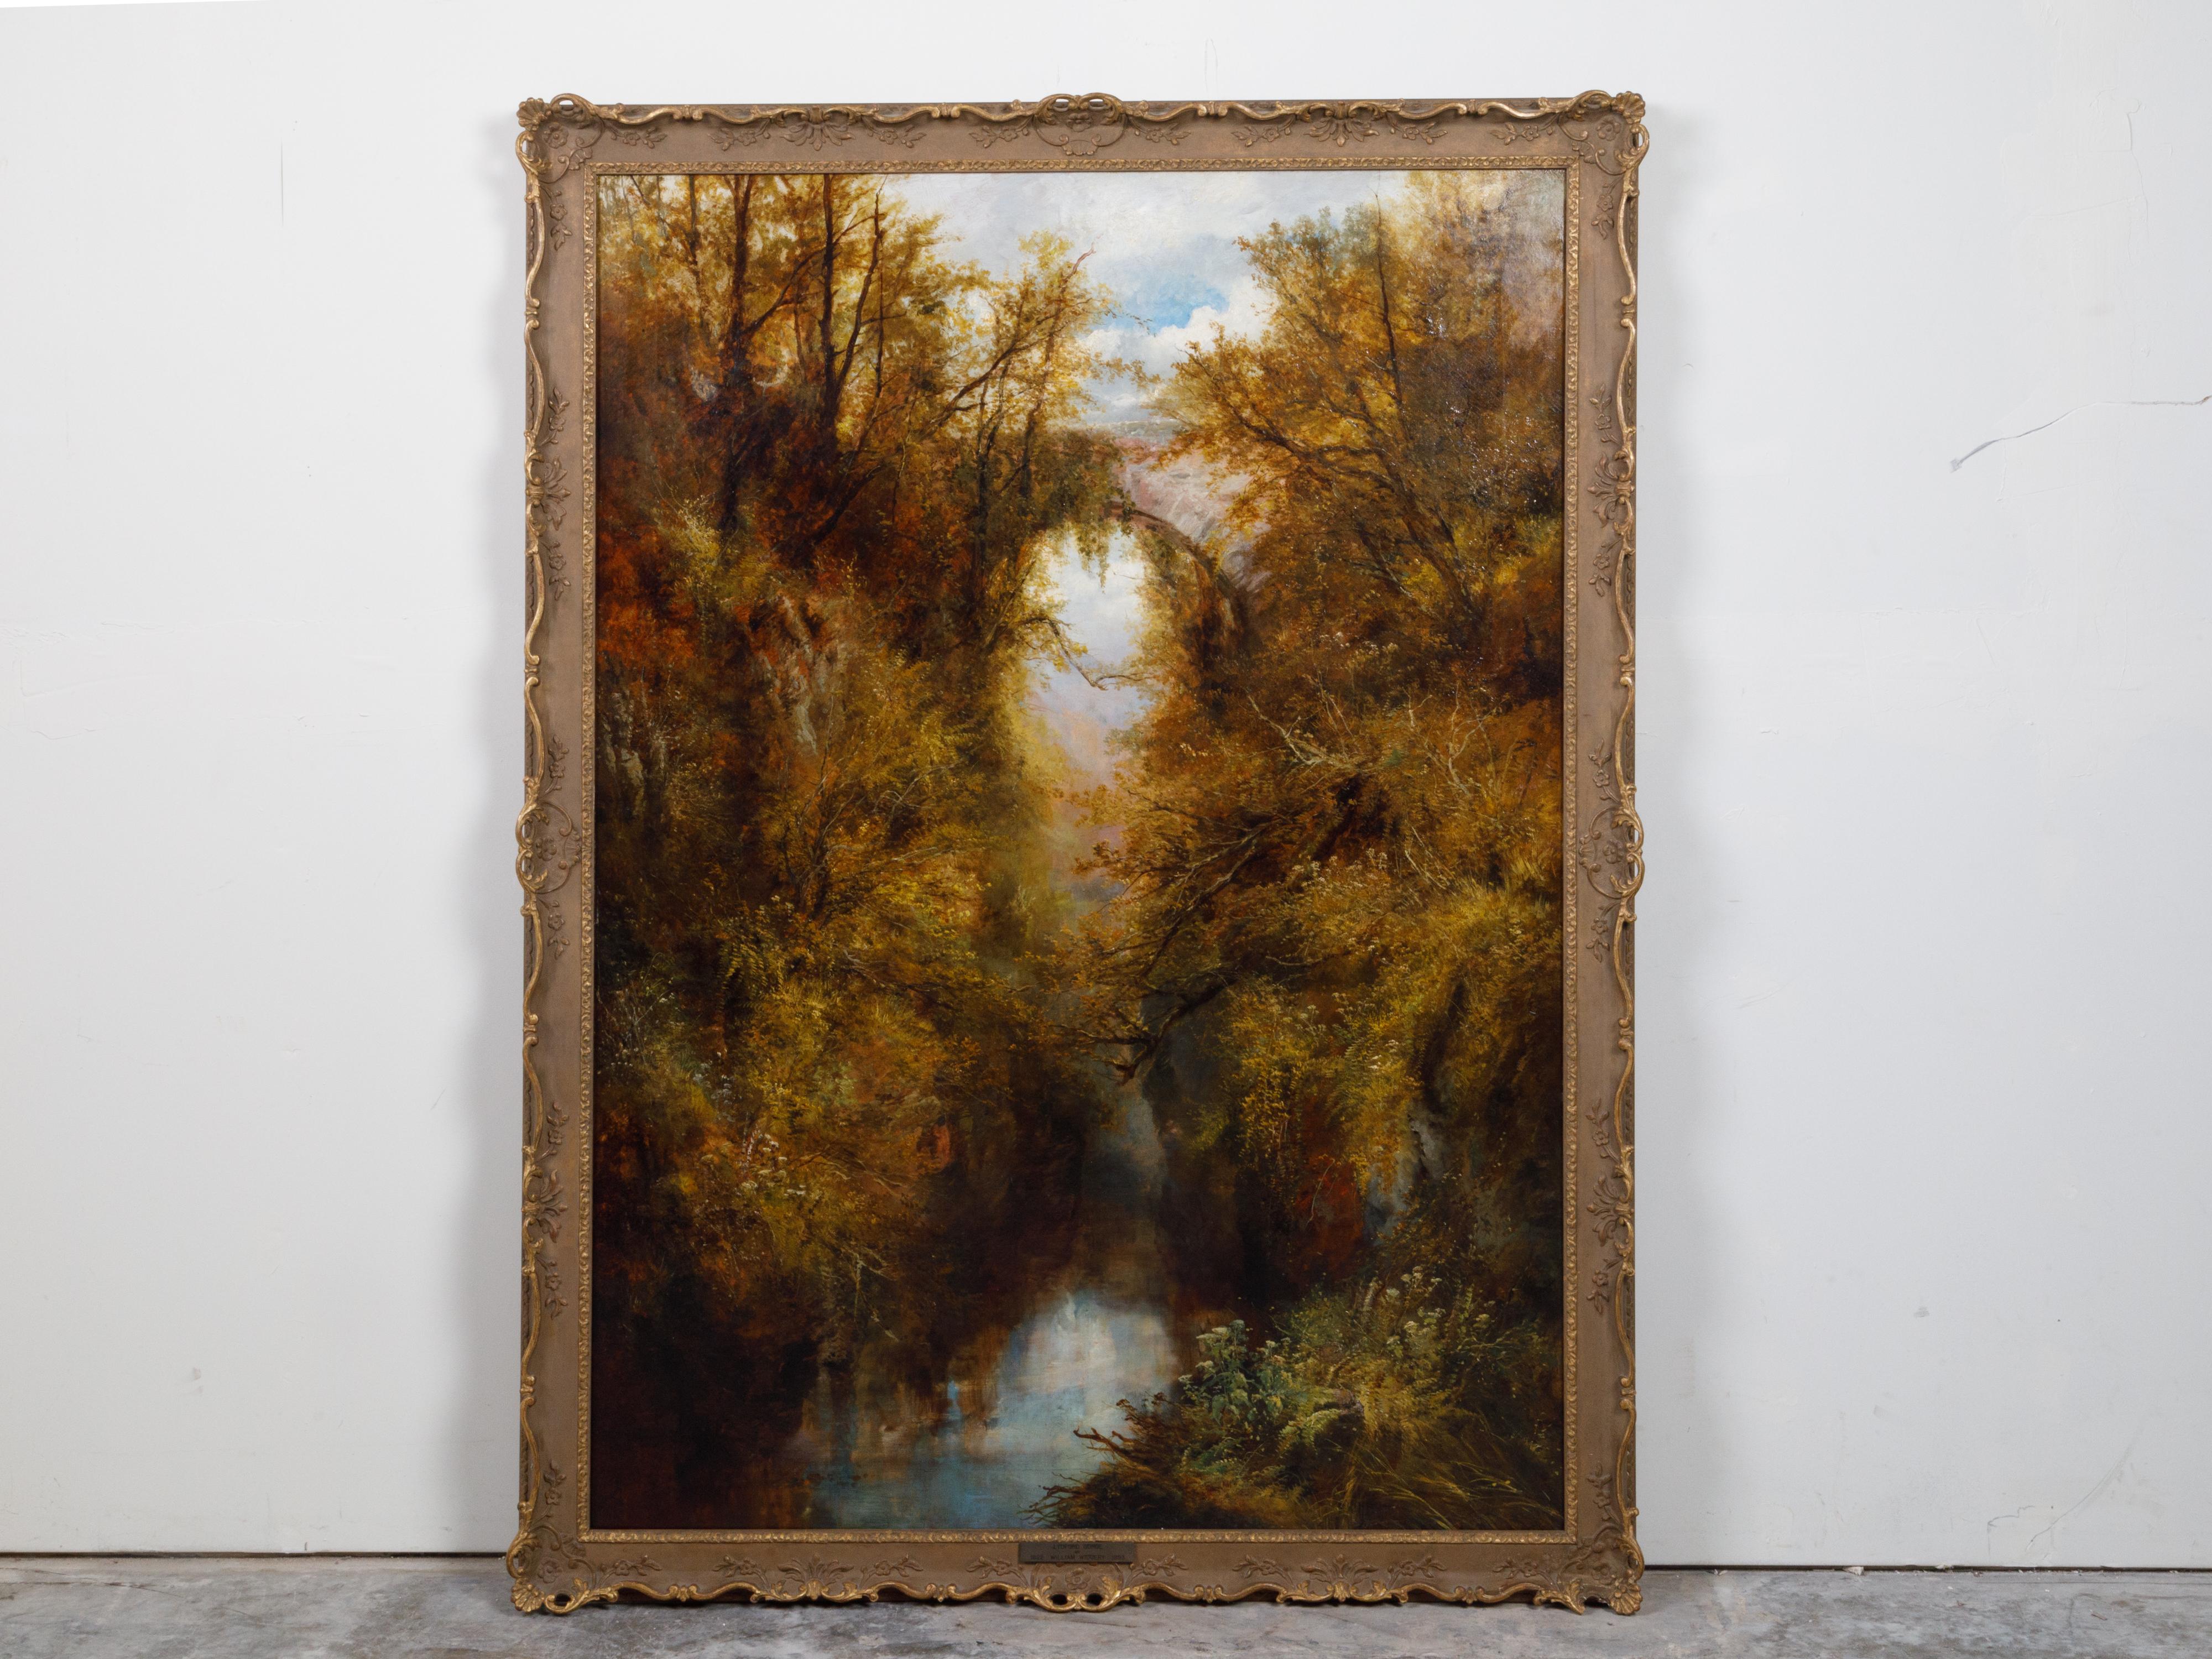 An English oil on canvas landscape painting by William Widgery (1822–1893) from the late 19th century depicting Lydford Gorge, in carved frame. Created in England during the second half of the 19th century, this vertical landscape depicts Lydford